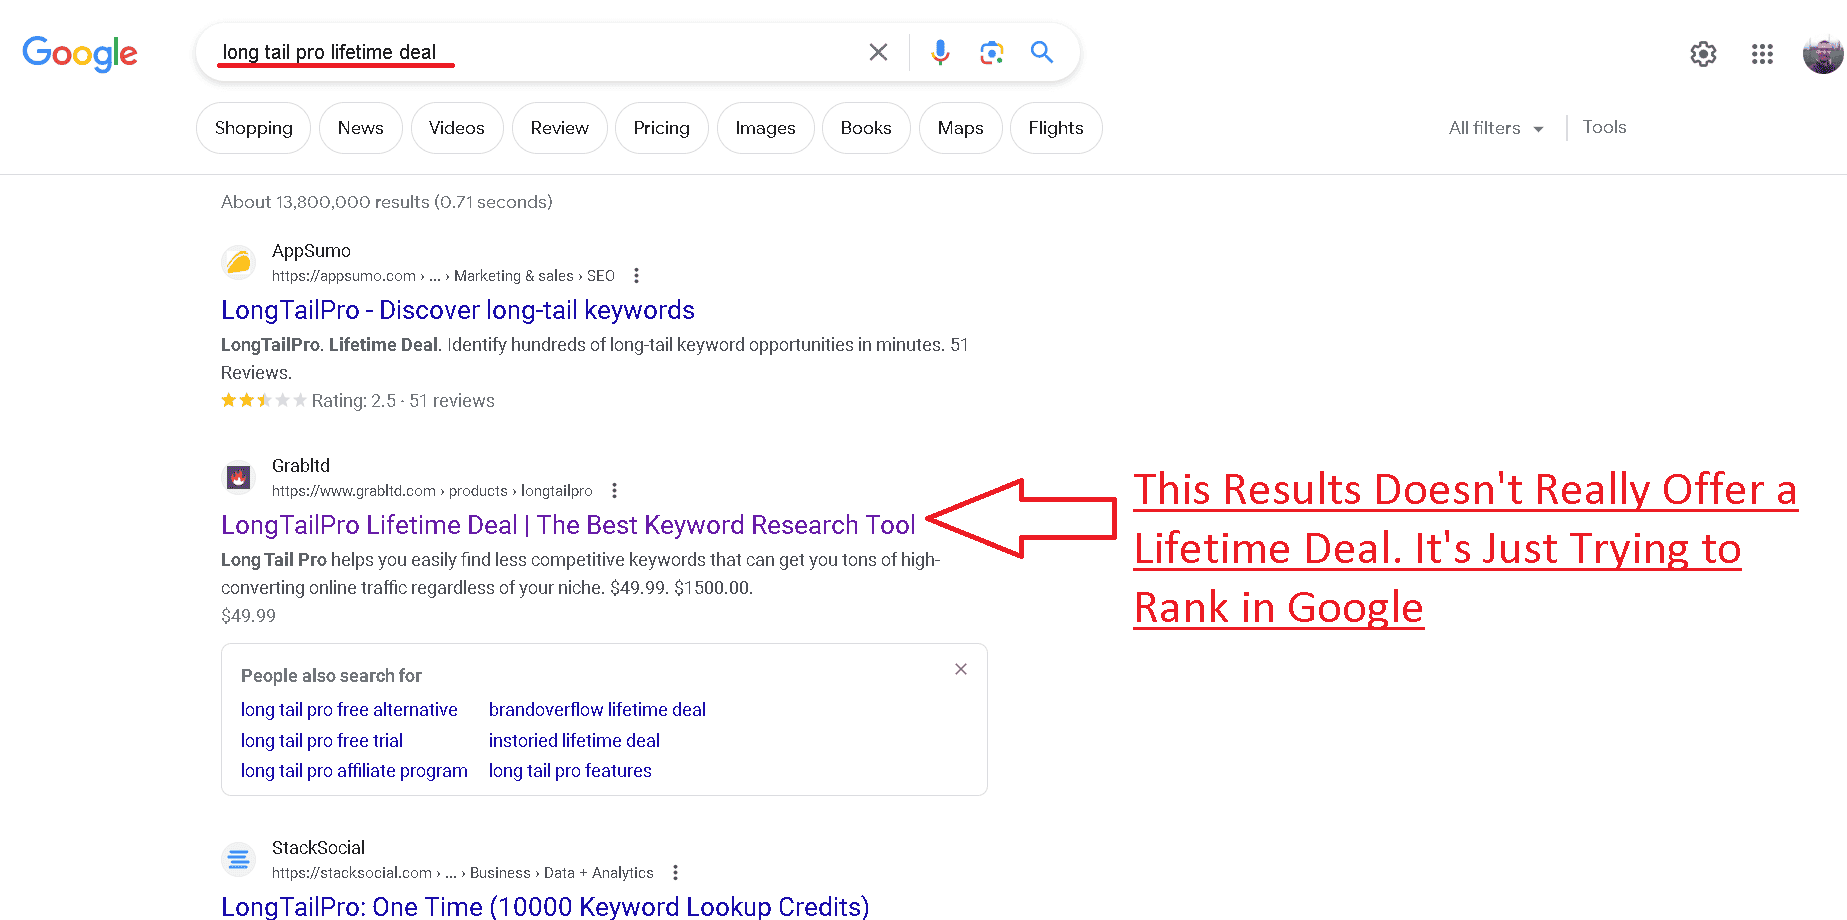 "Long Tail Pro lifetime deal" query in Google shows no relevant results.